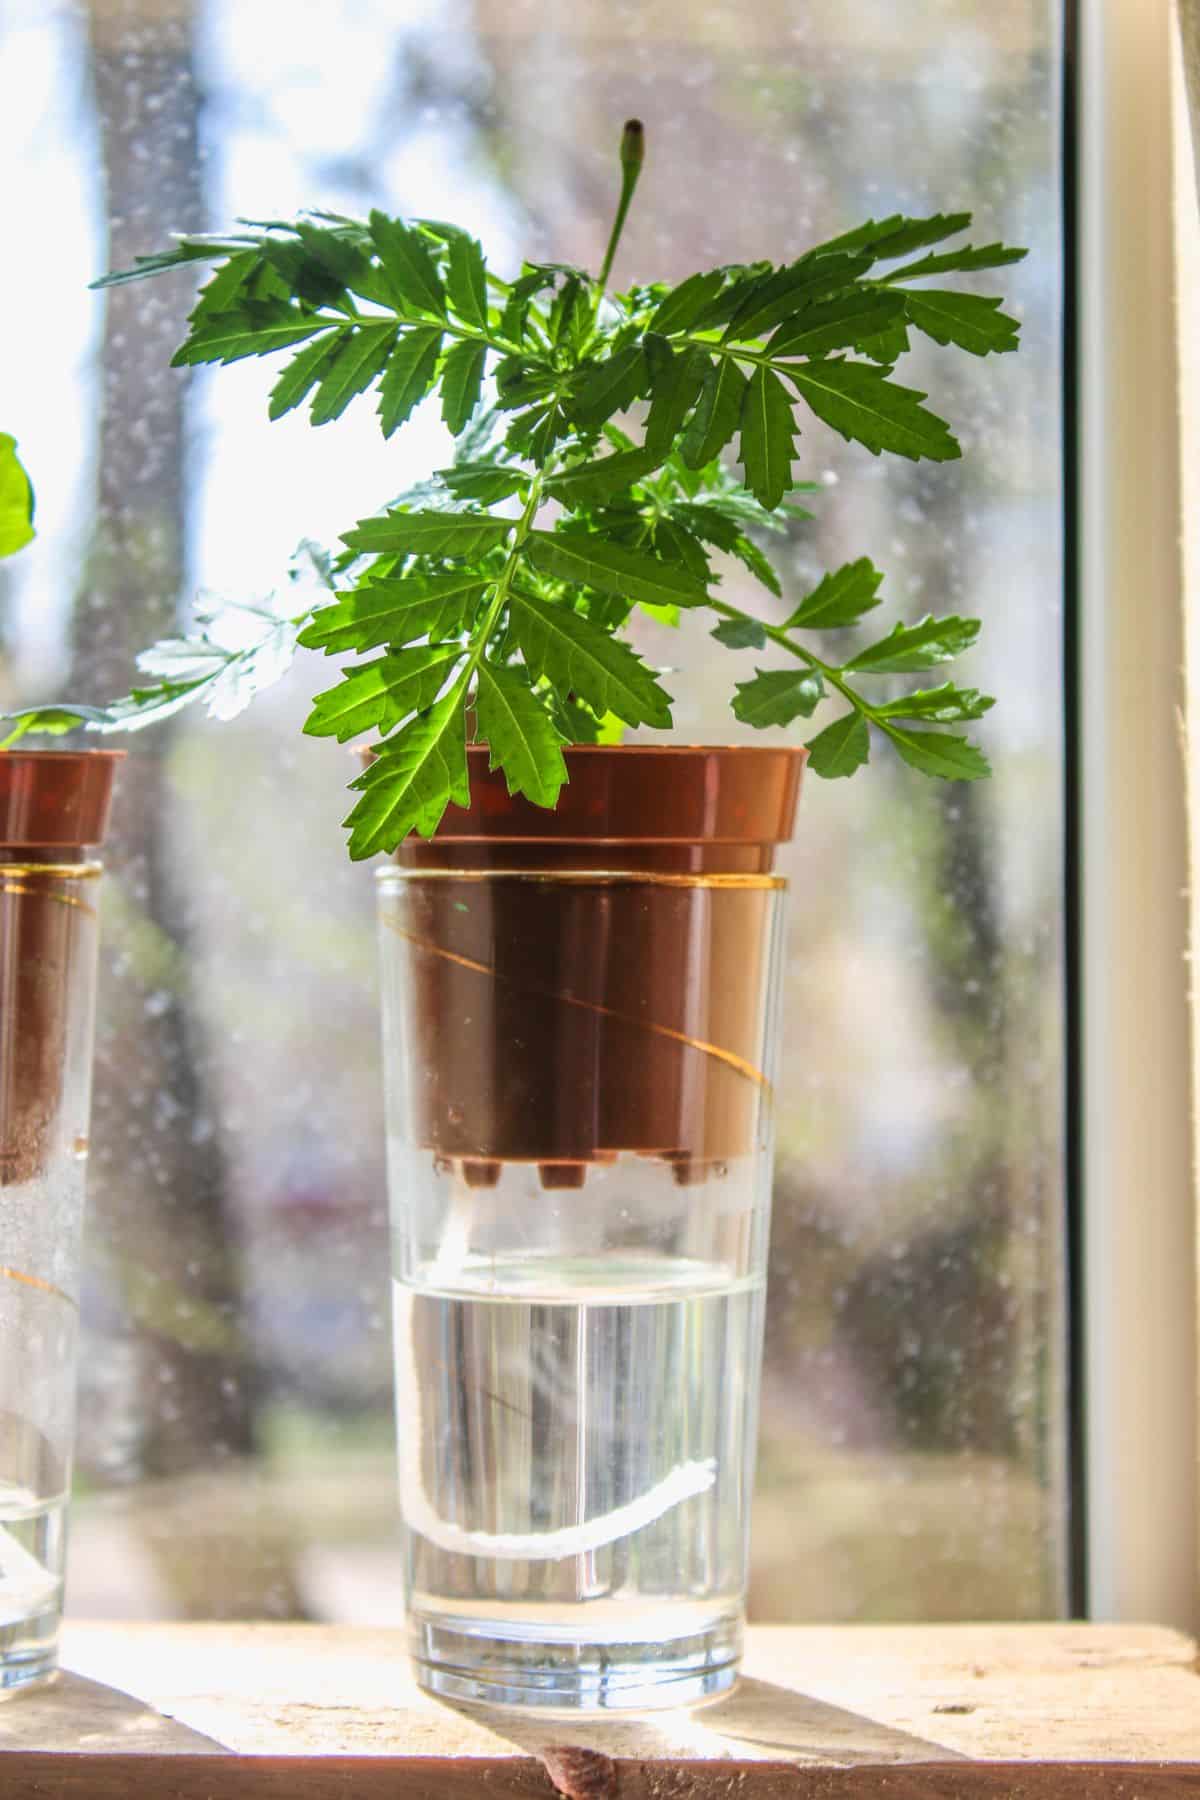 A self watering pot that can be used inside or outside